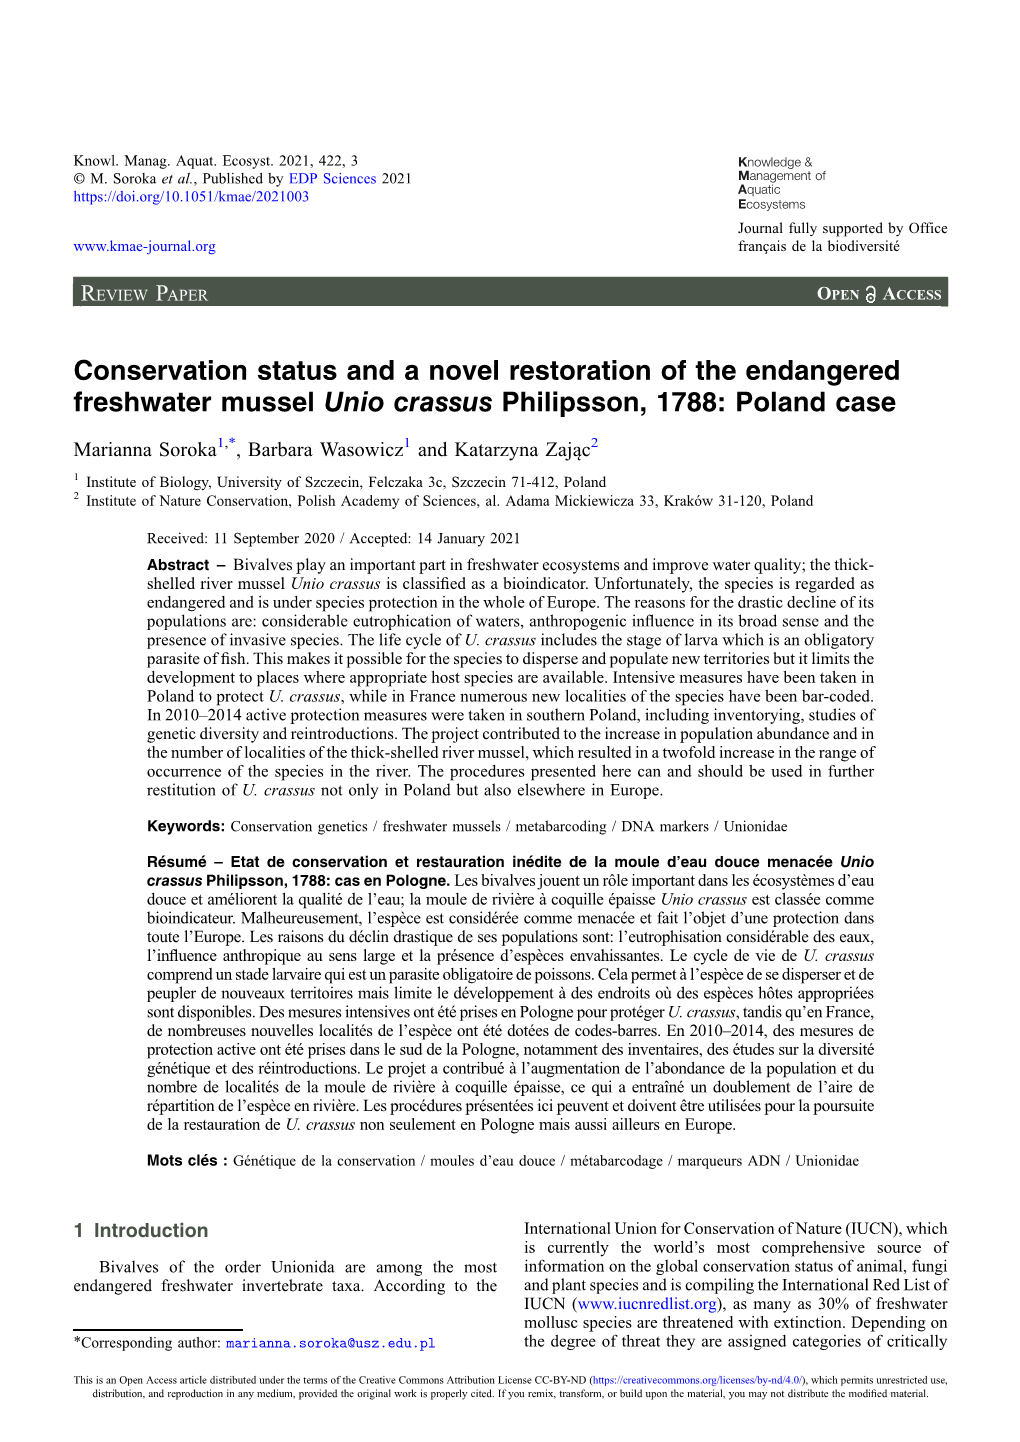 Conservation Status and a Novel Restoration of the Endangered Freshwater Mussel Unio Crassus Philipsson, 1788: Poland Case